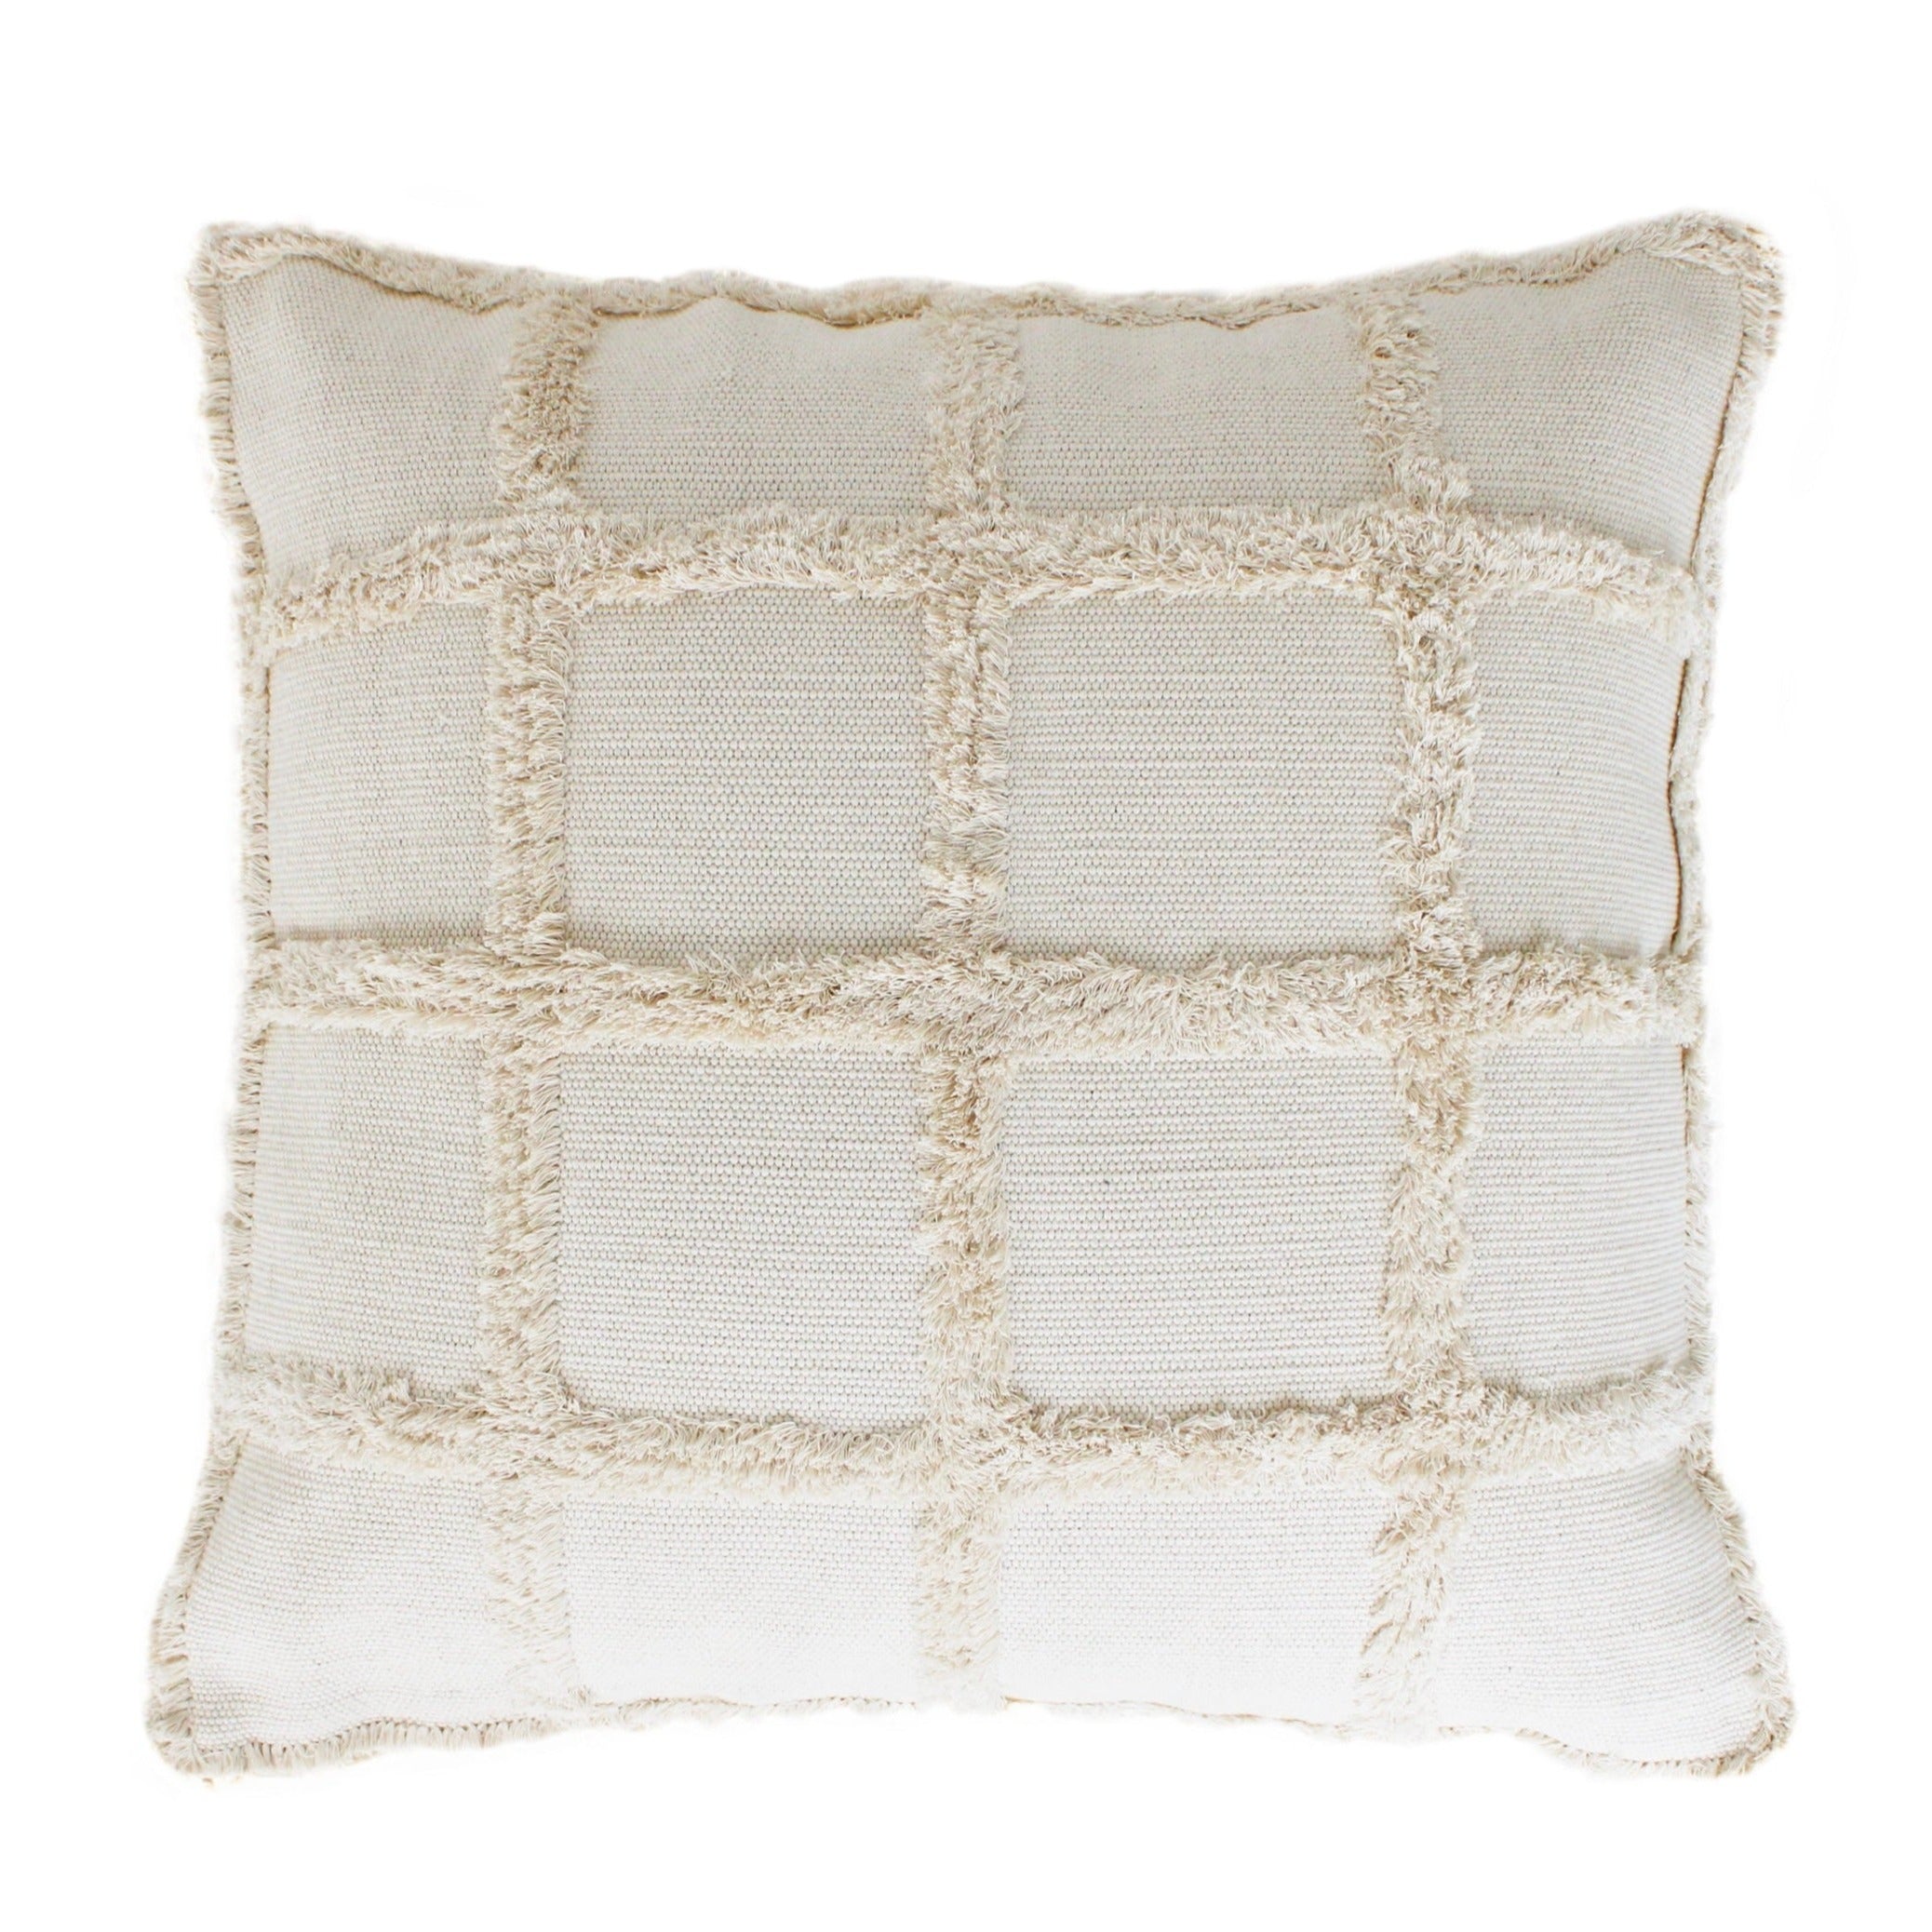 Zara 18 inch Artisan Crafted Decorative Throw Pillow Cushion Cover - White  Cotton Jute Leaf Pattern - Decorshore